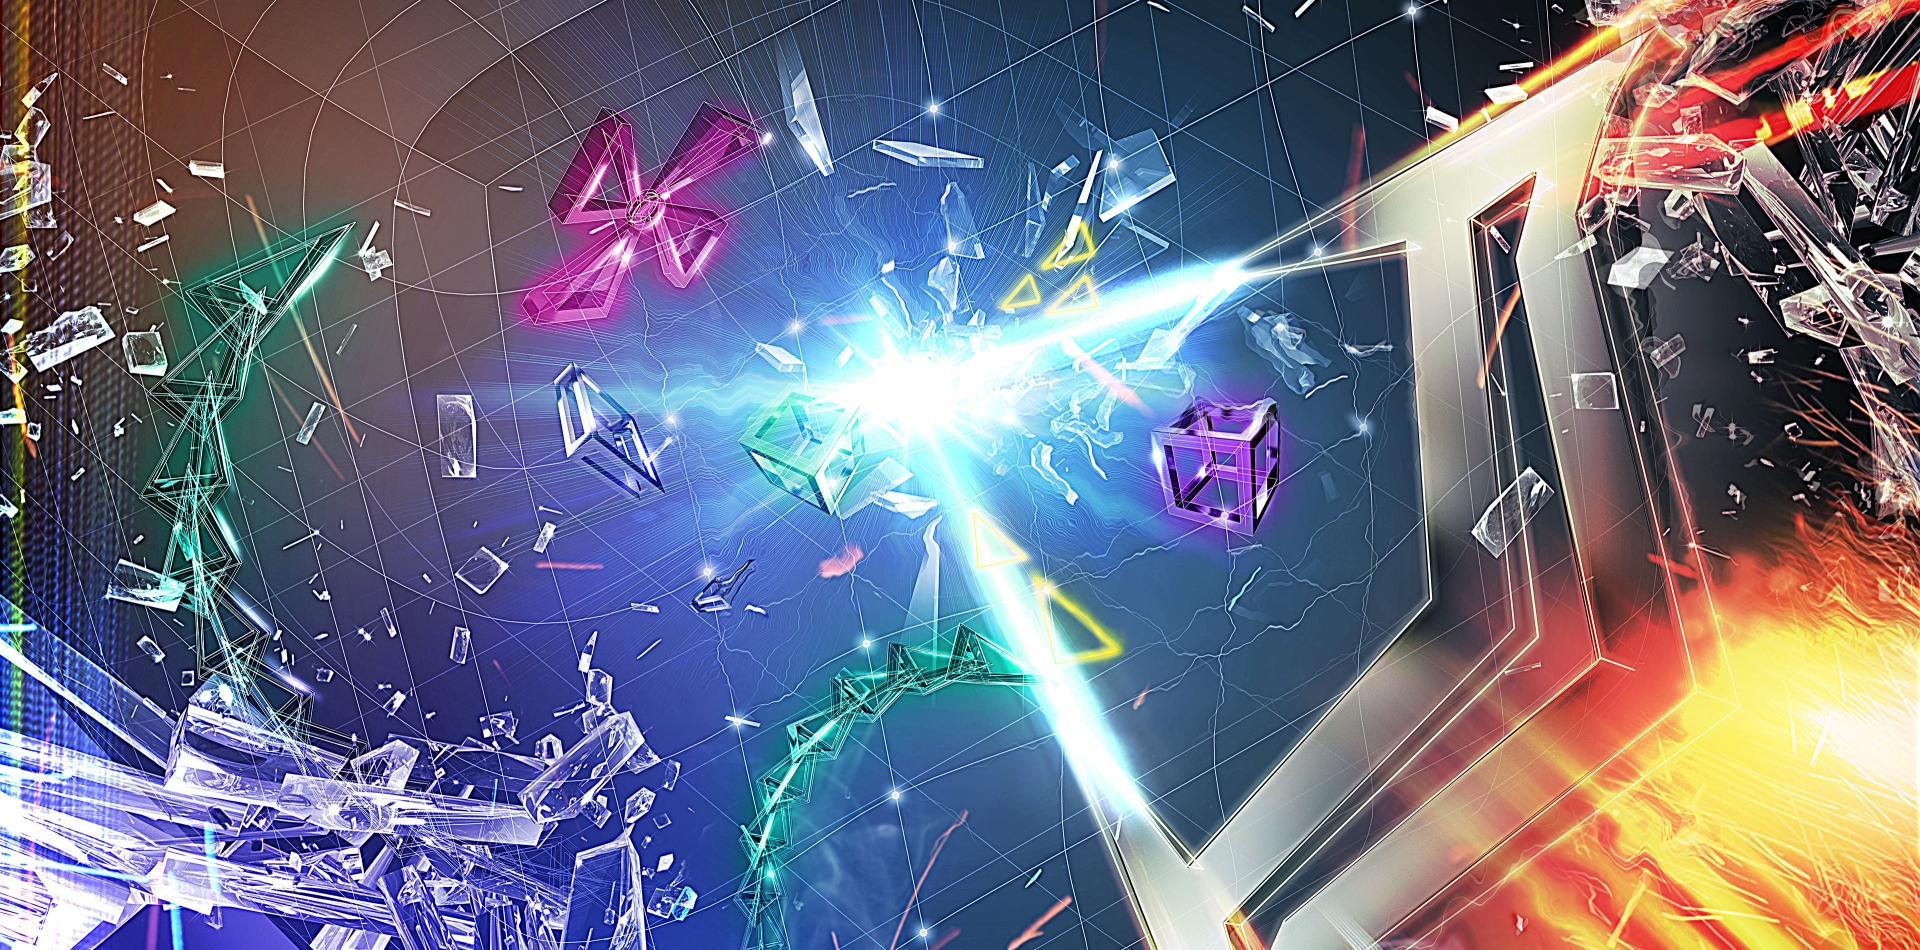 geometry wars 3 dimensions taken downmissing android